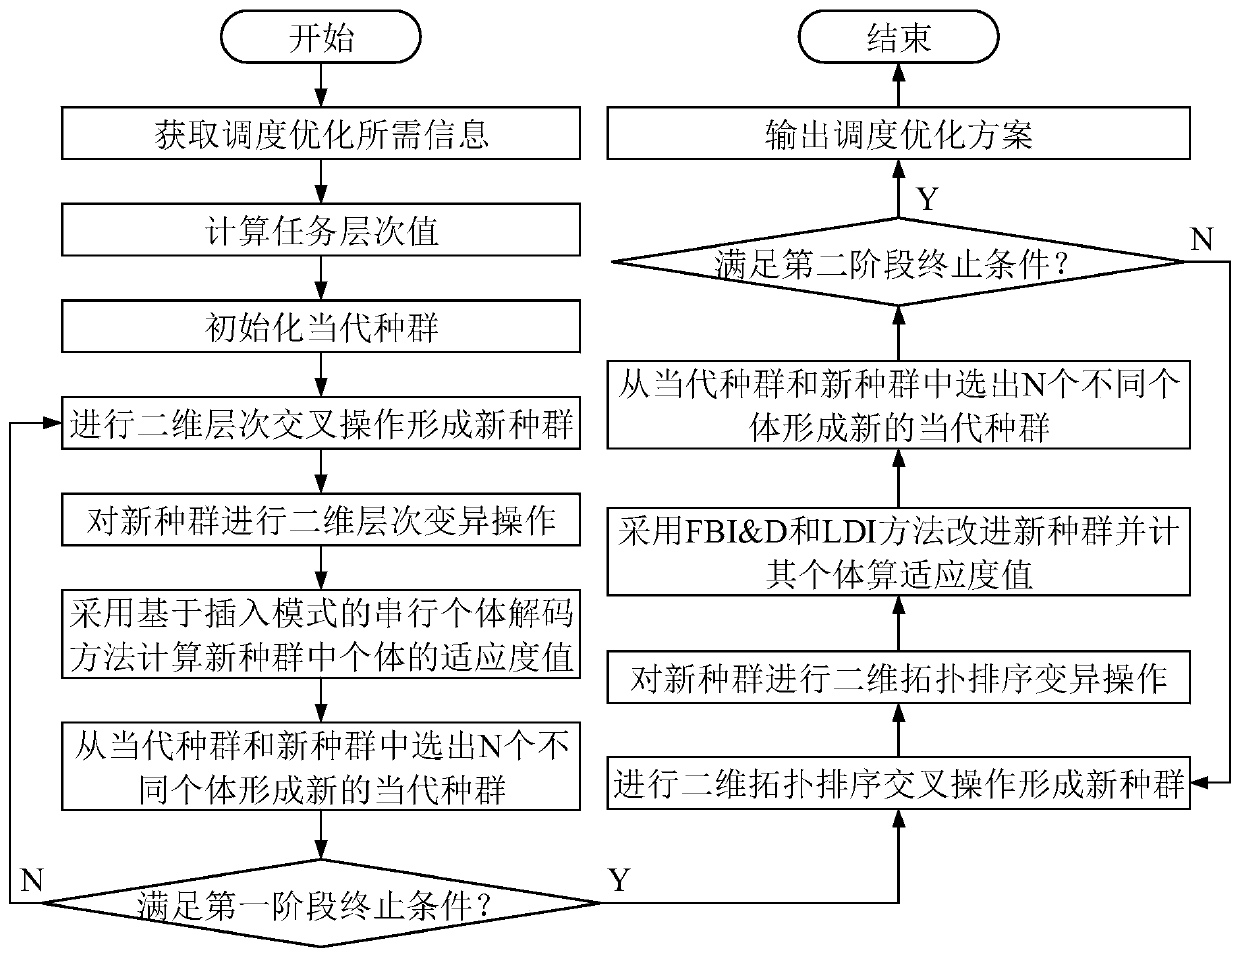 Cloud workflow scheduling optimization method using two-dimensional two-stage intelligent computing algorithm